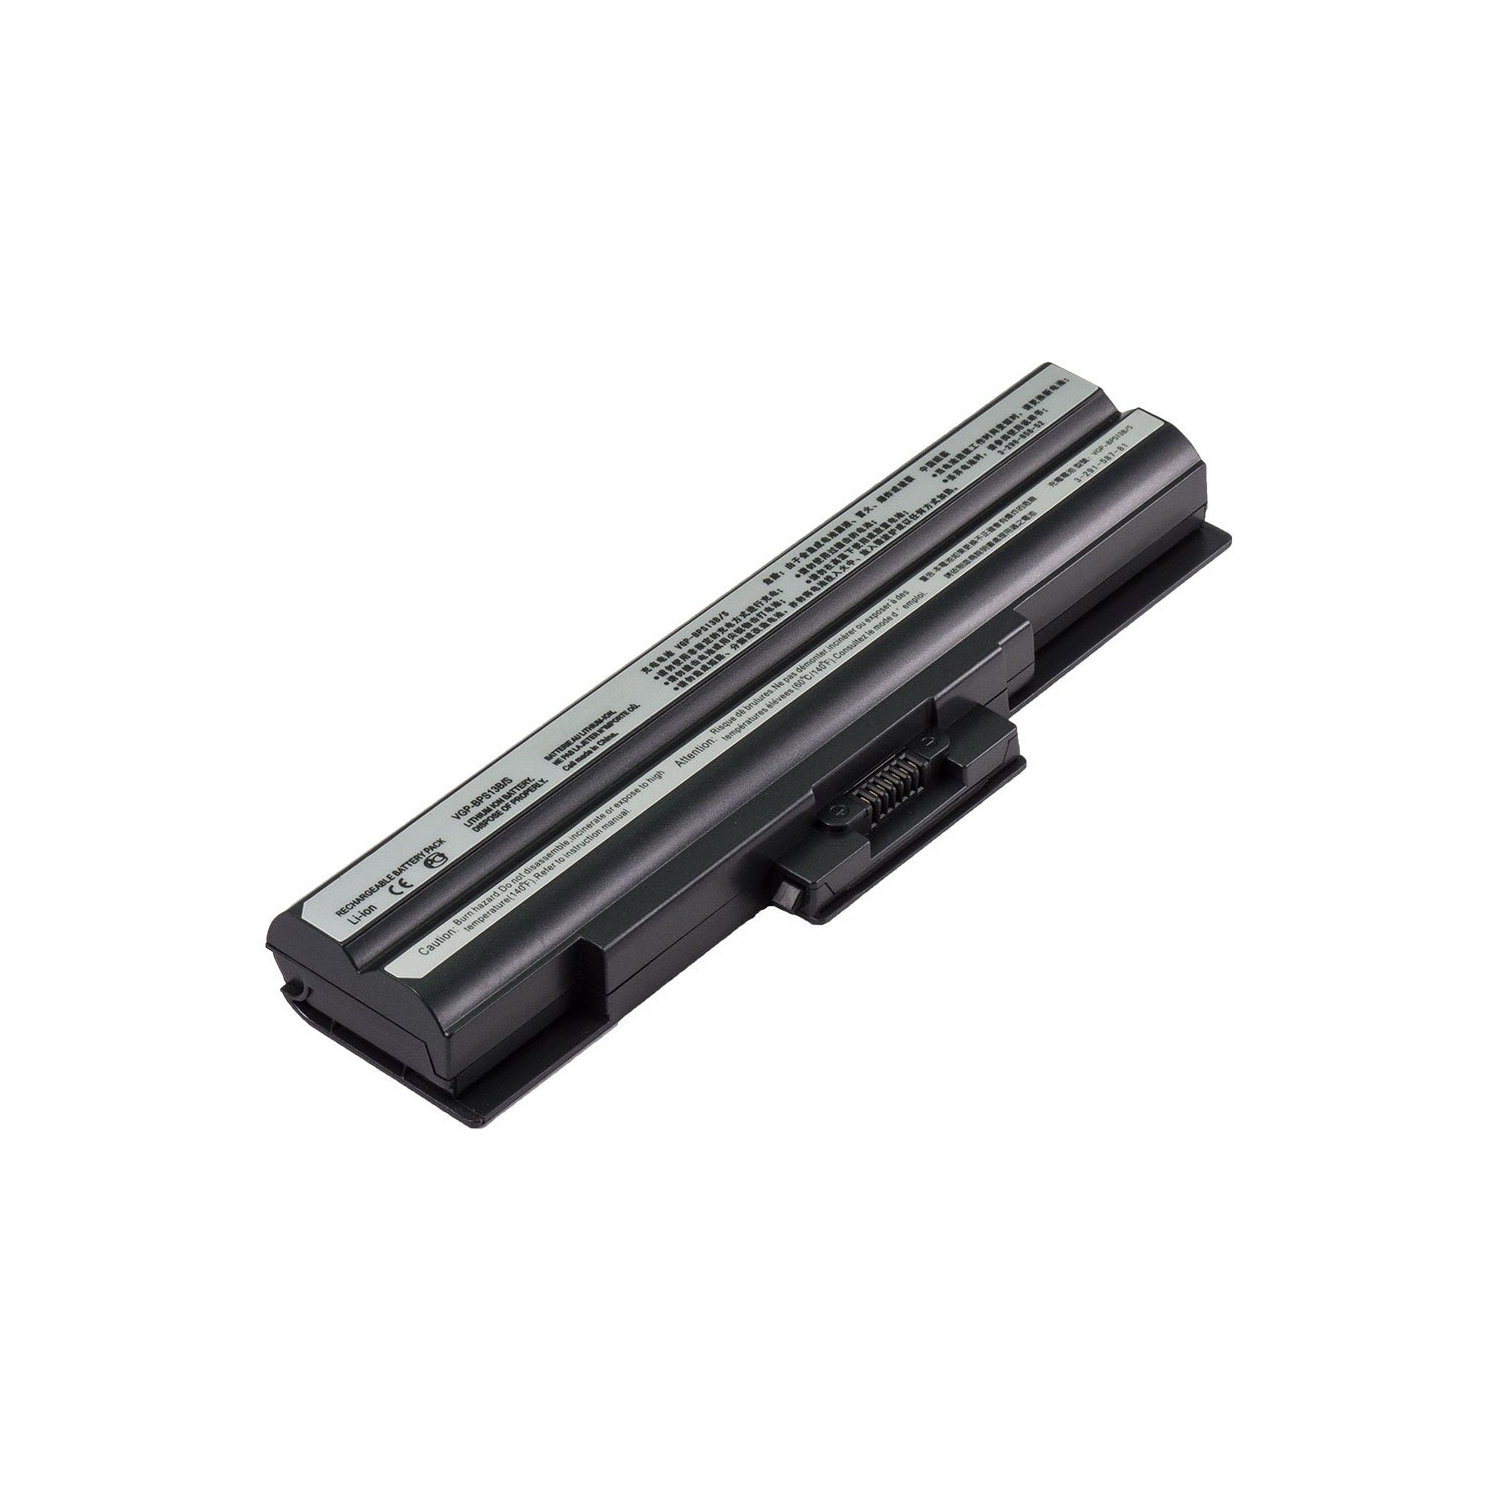 Laptop Battery Replacement for Sony VAIO VGN-SR129E/B, VGP-BPL13, VGP-BPS13/Q, VGP-BPS13A/B, VGP-BPS13A/S, VGP-BPS13A